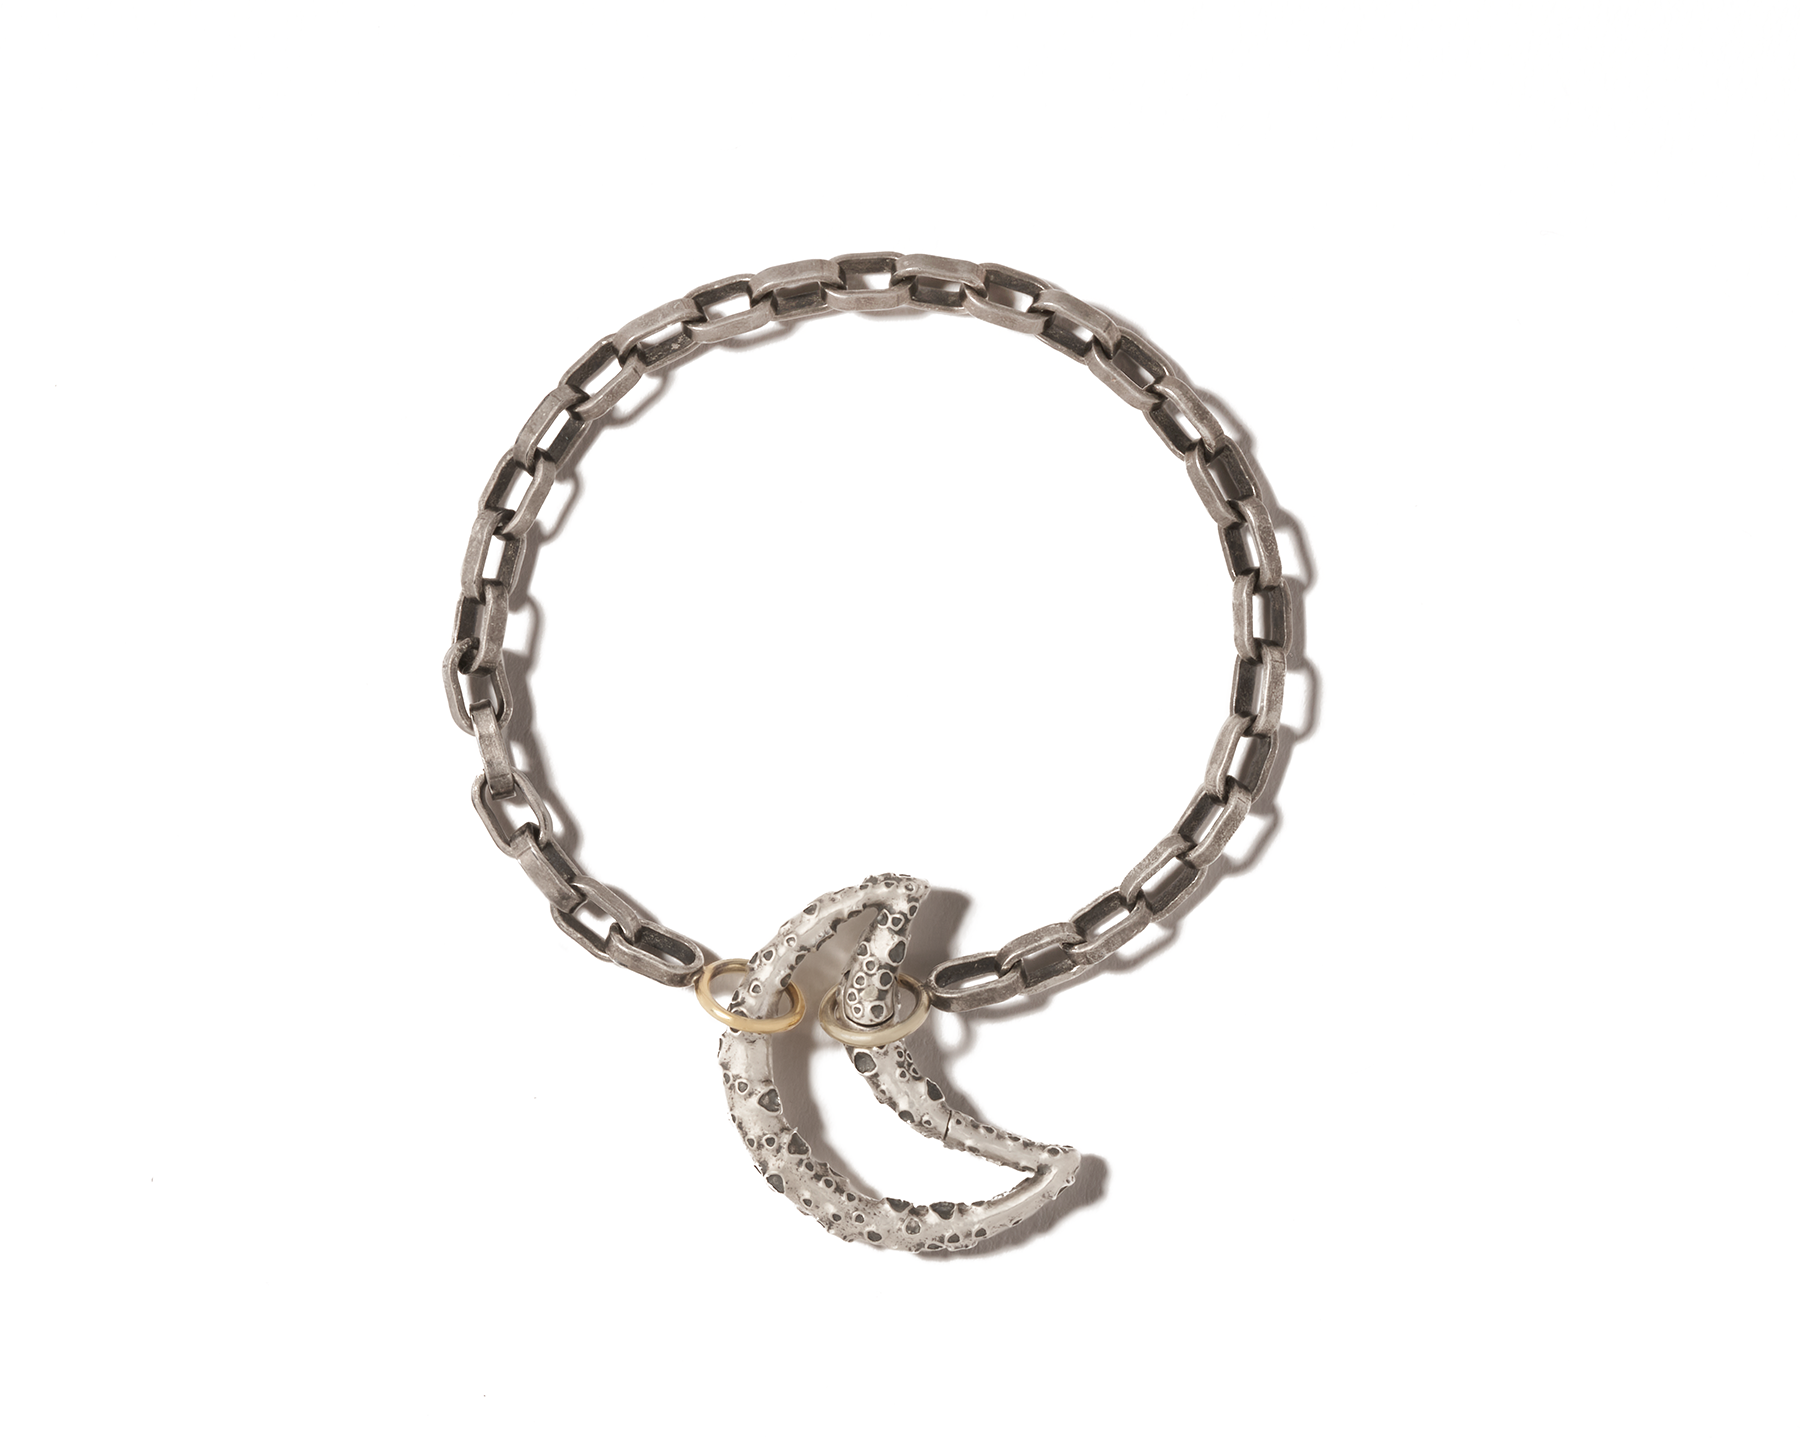 Silver moon charm with cratered surface attached to silver bracelet